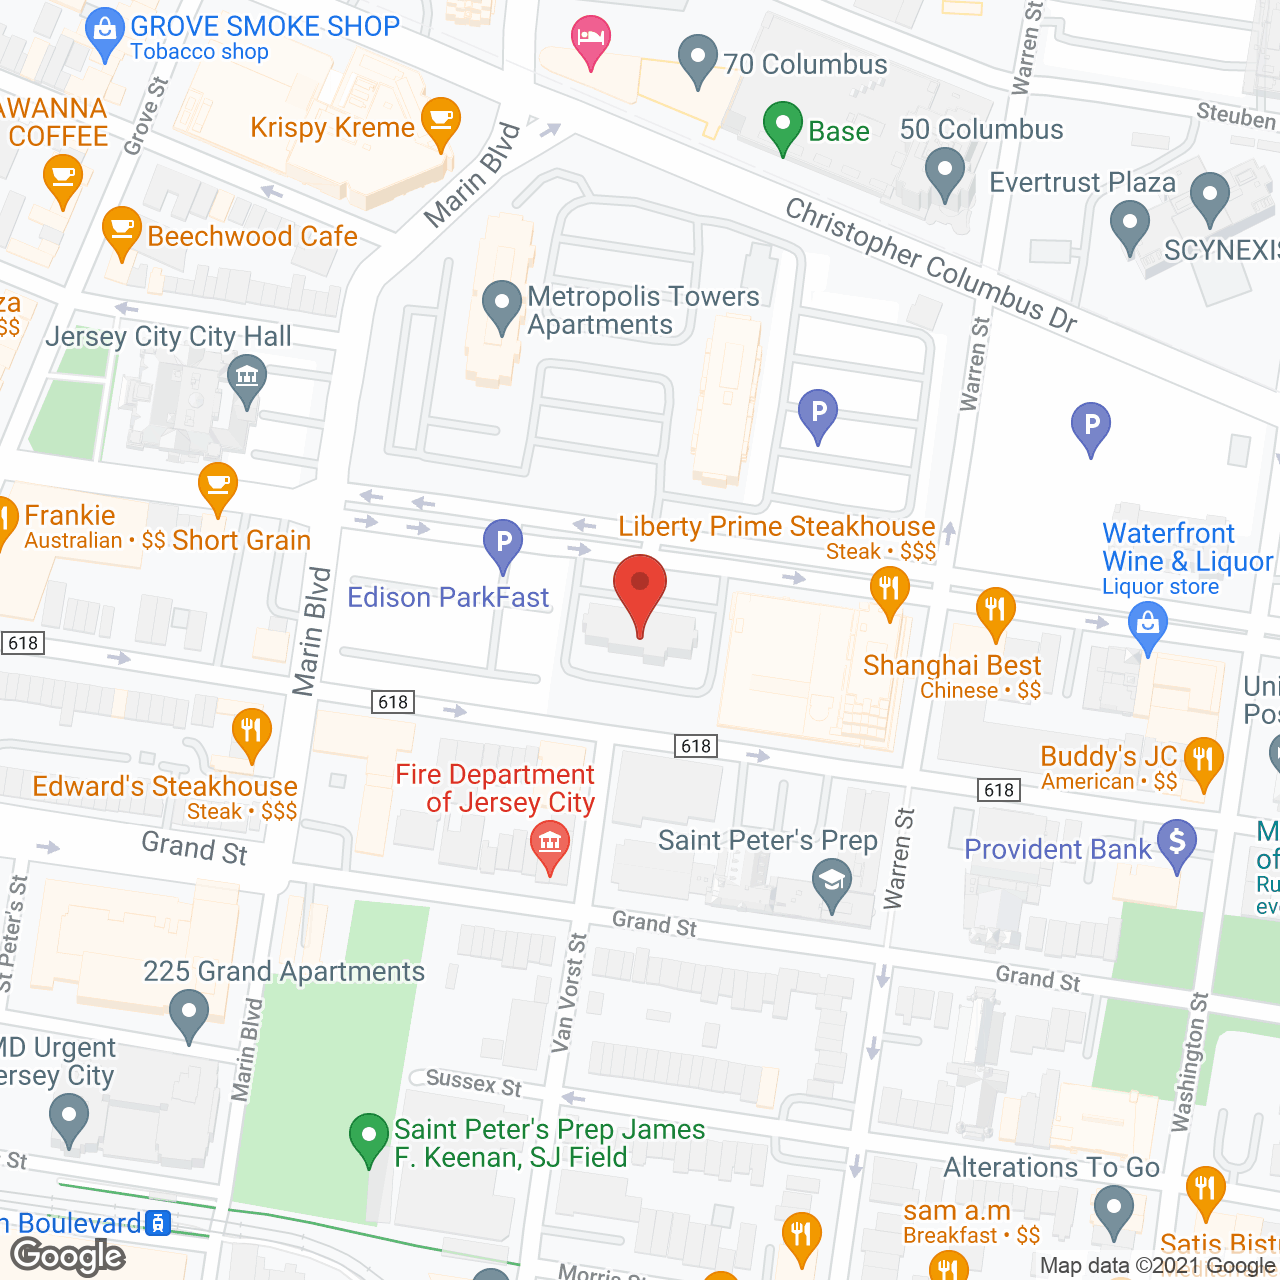 Montgomery Towers in google map